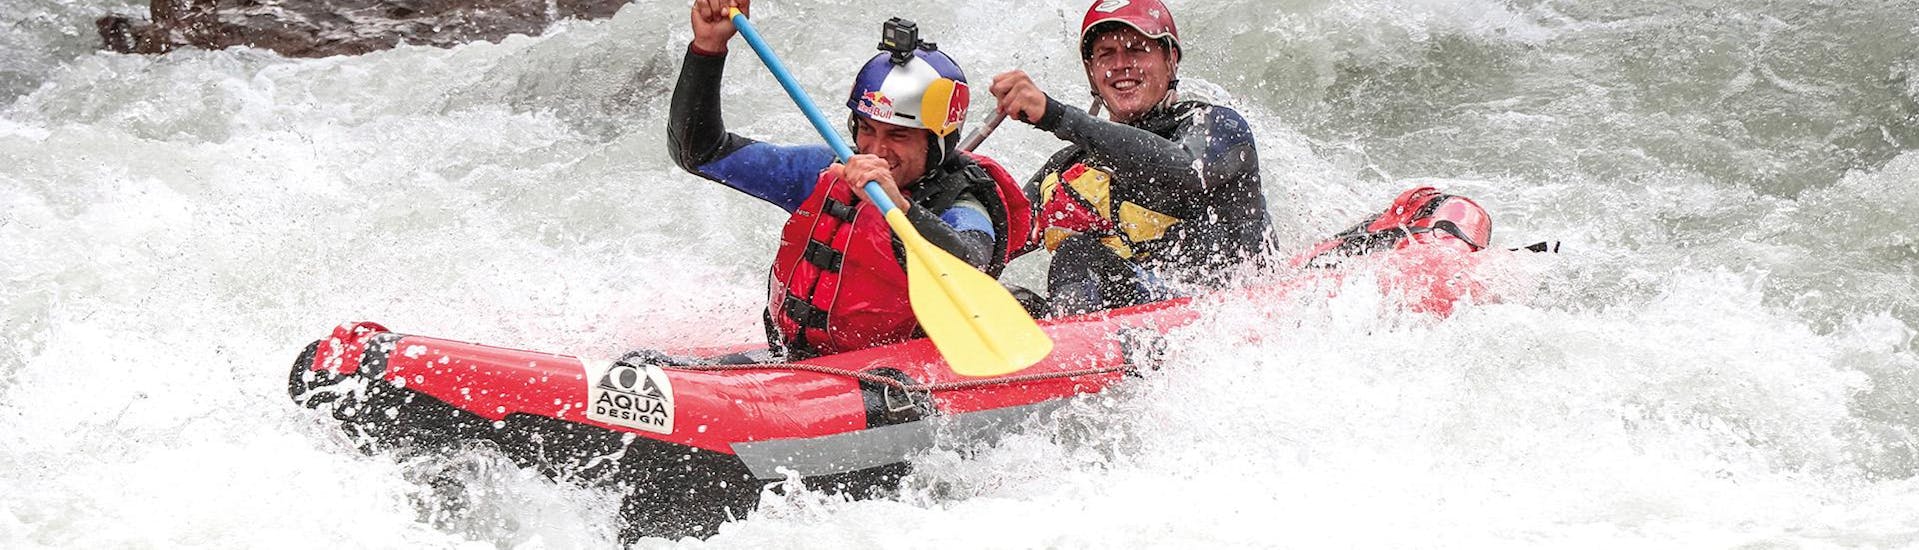 A tandem in the whitewater during the Tandem Rafting on the Lütschine River in Interlaken with Outdoor Switzerland AG.